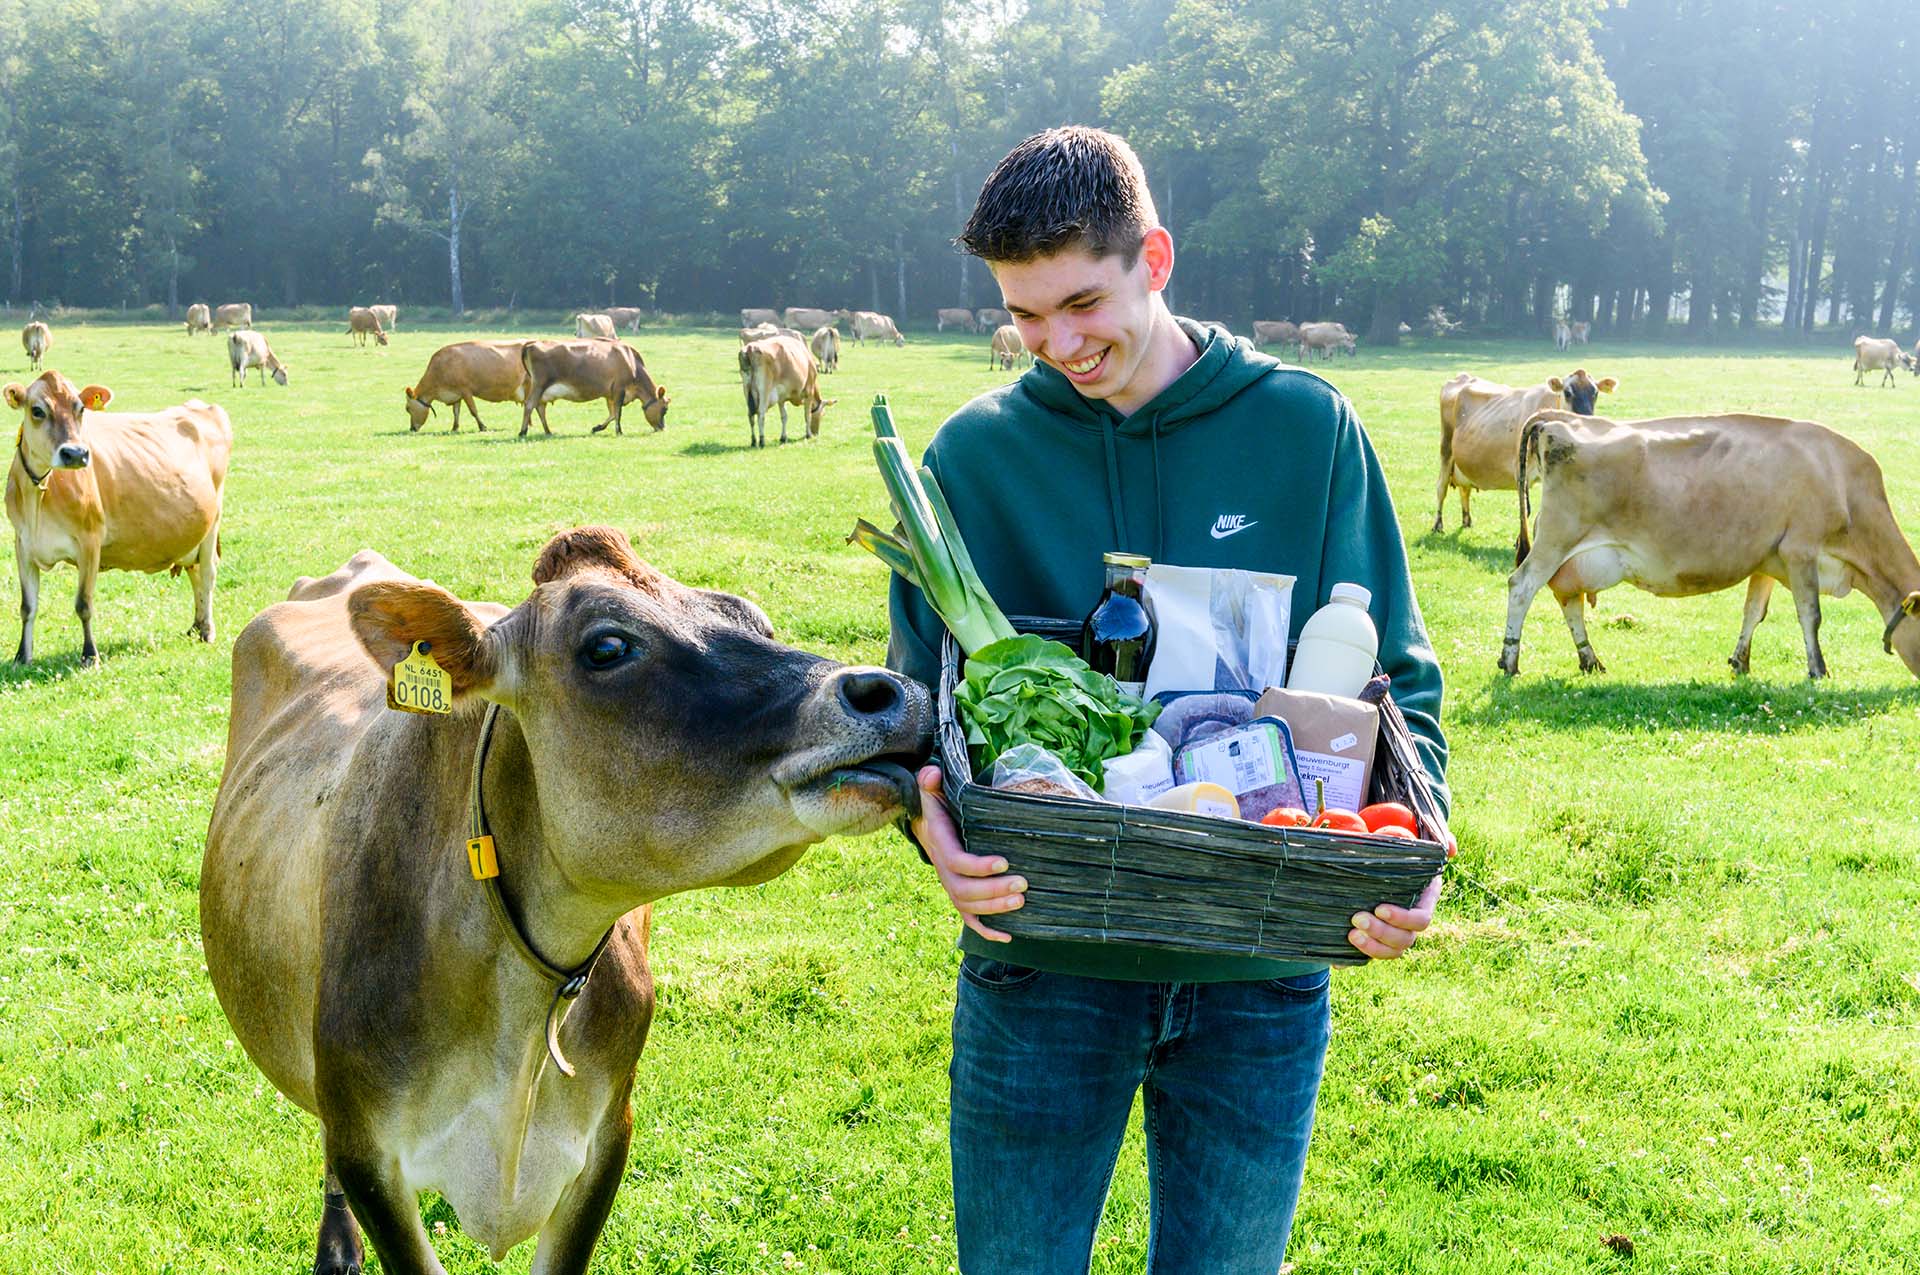 A cow touches the hand of the son of the family Nieuwenburg holding biological products. The family are the owners of the biological farm shop De Nieuwenburgt